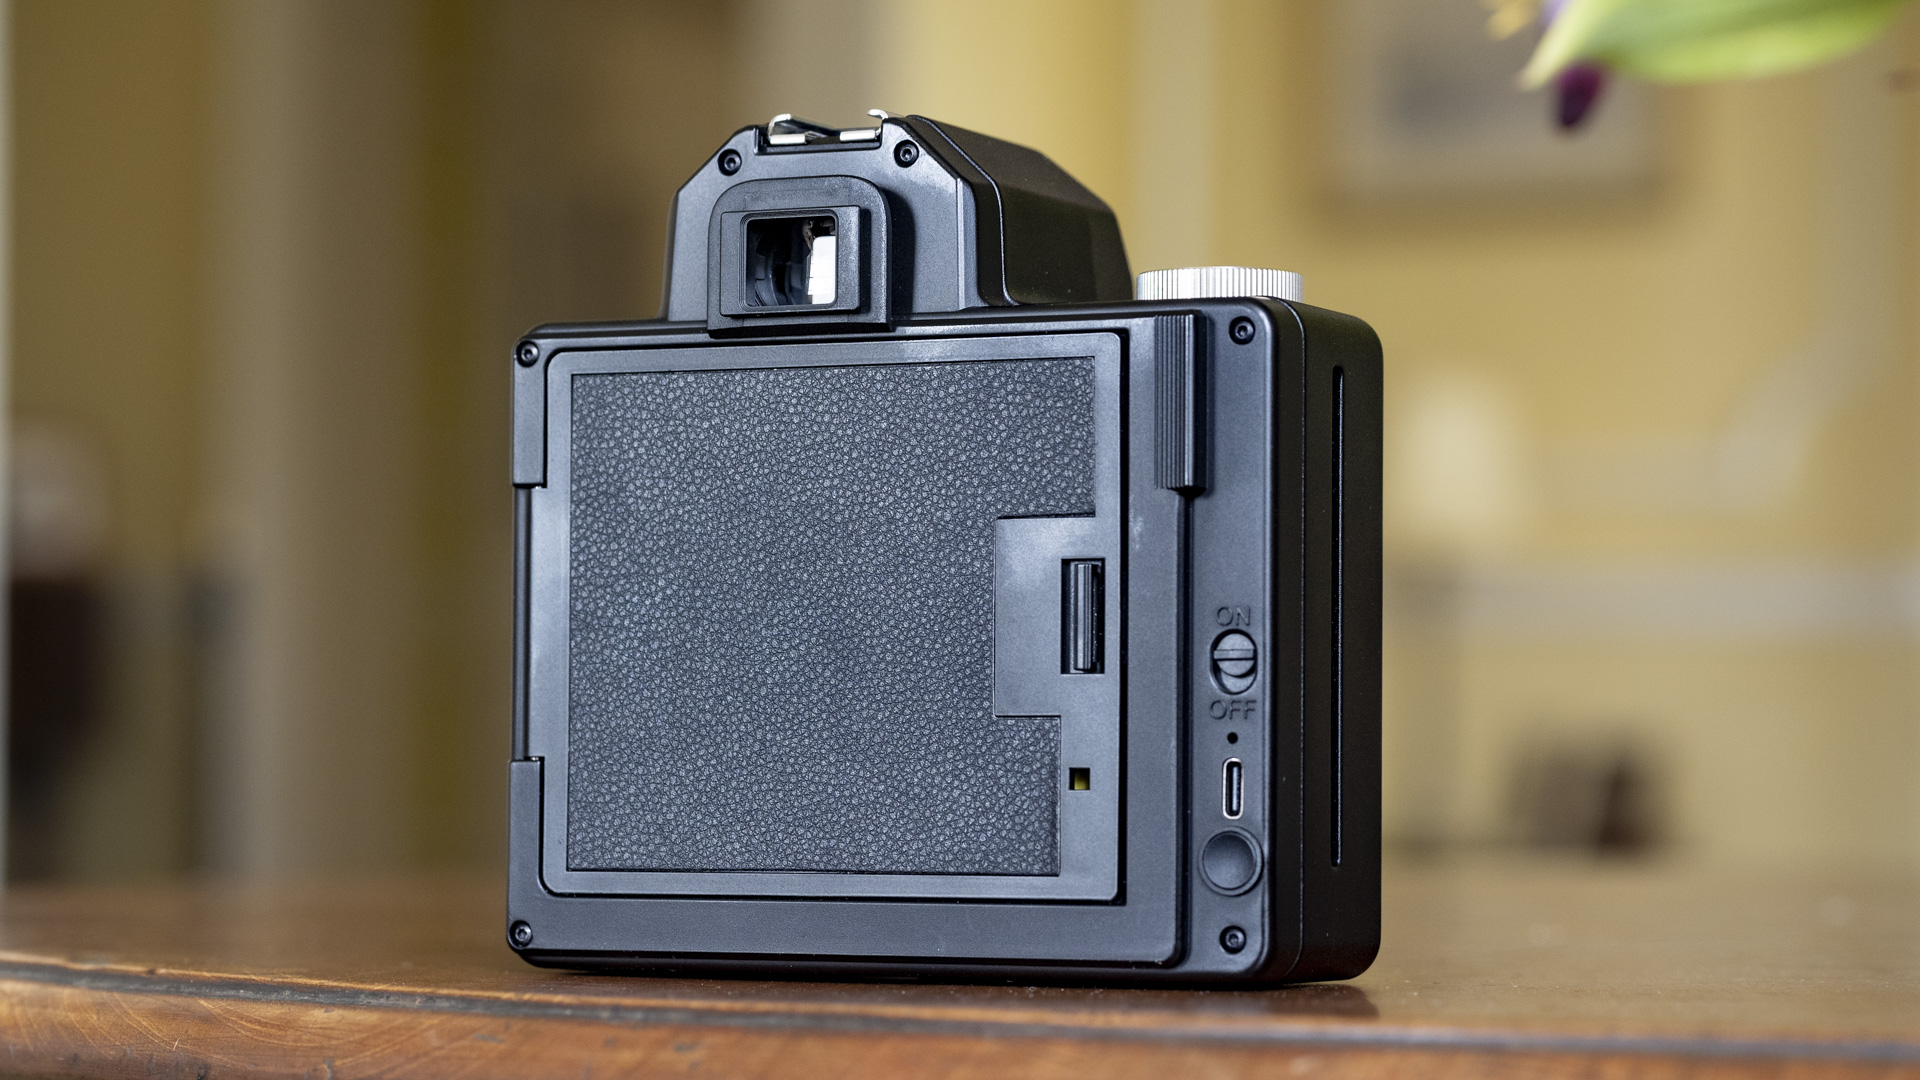 Rear of the Nons SL660 instant camera